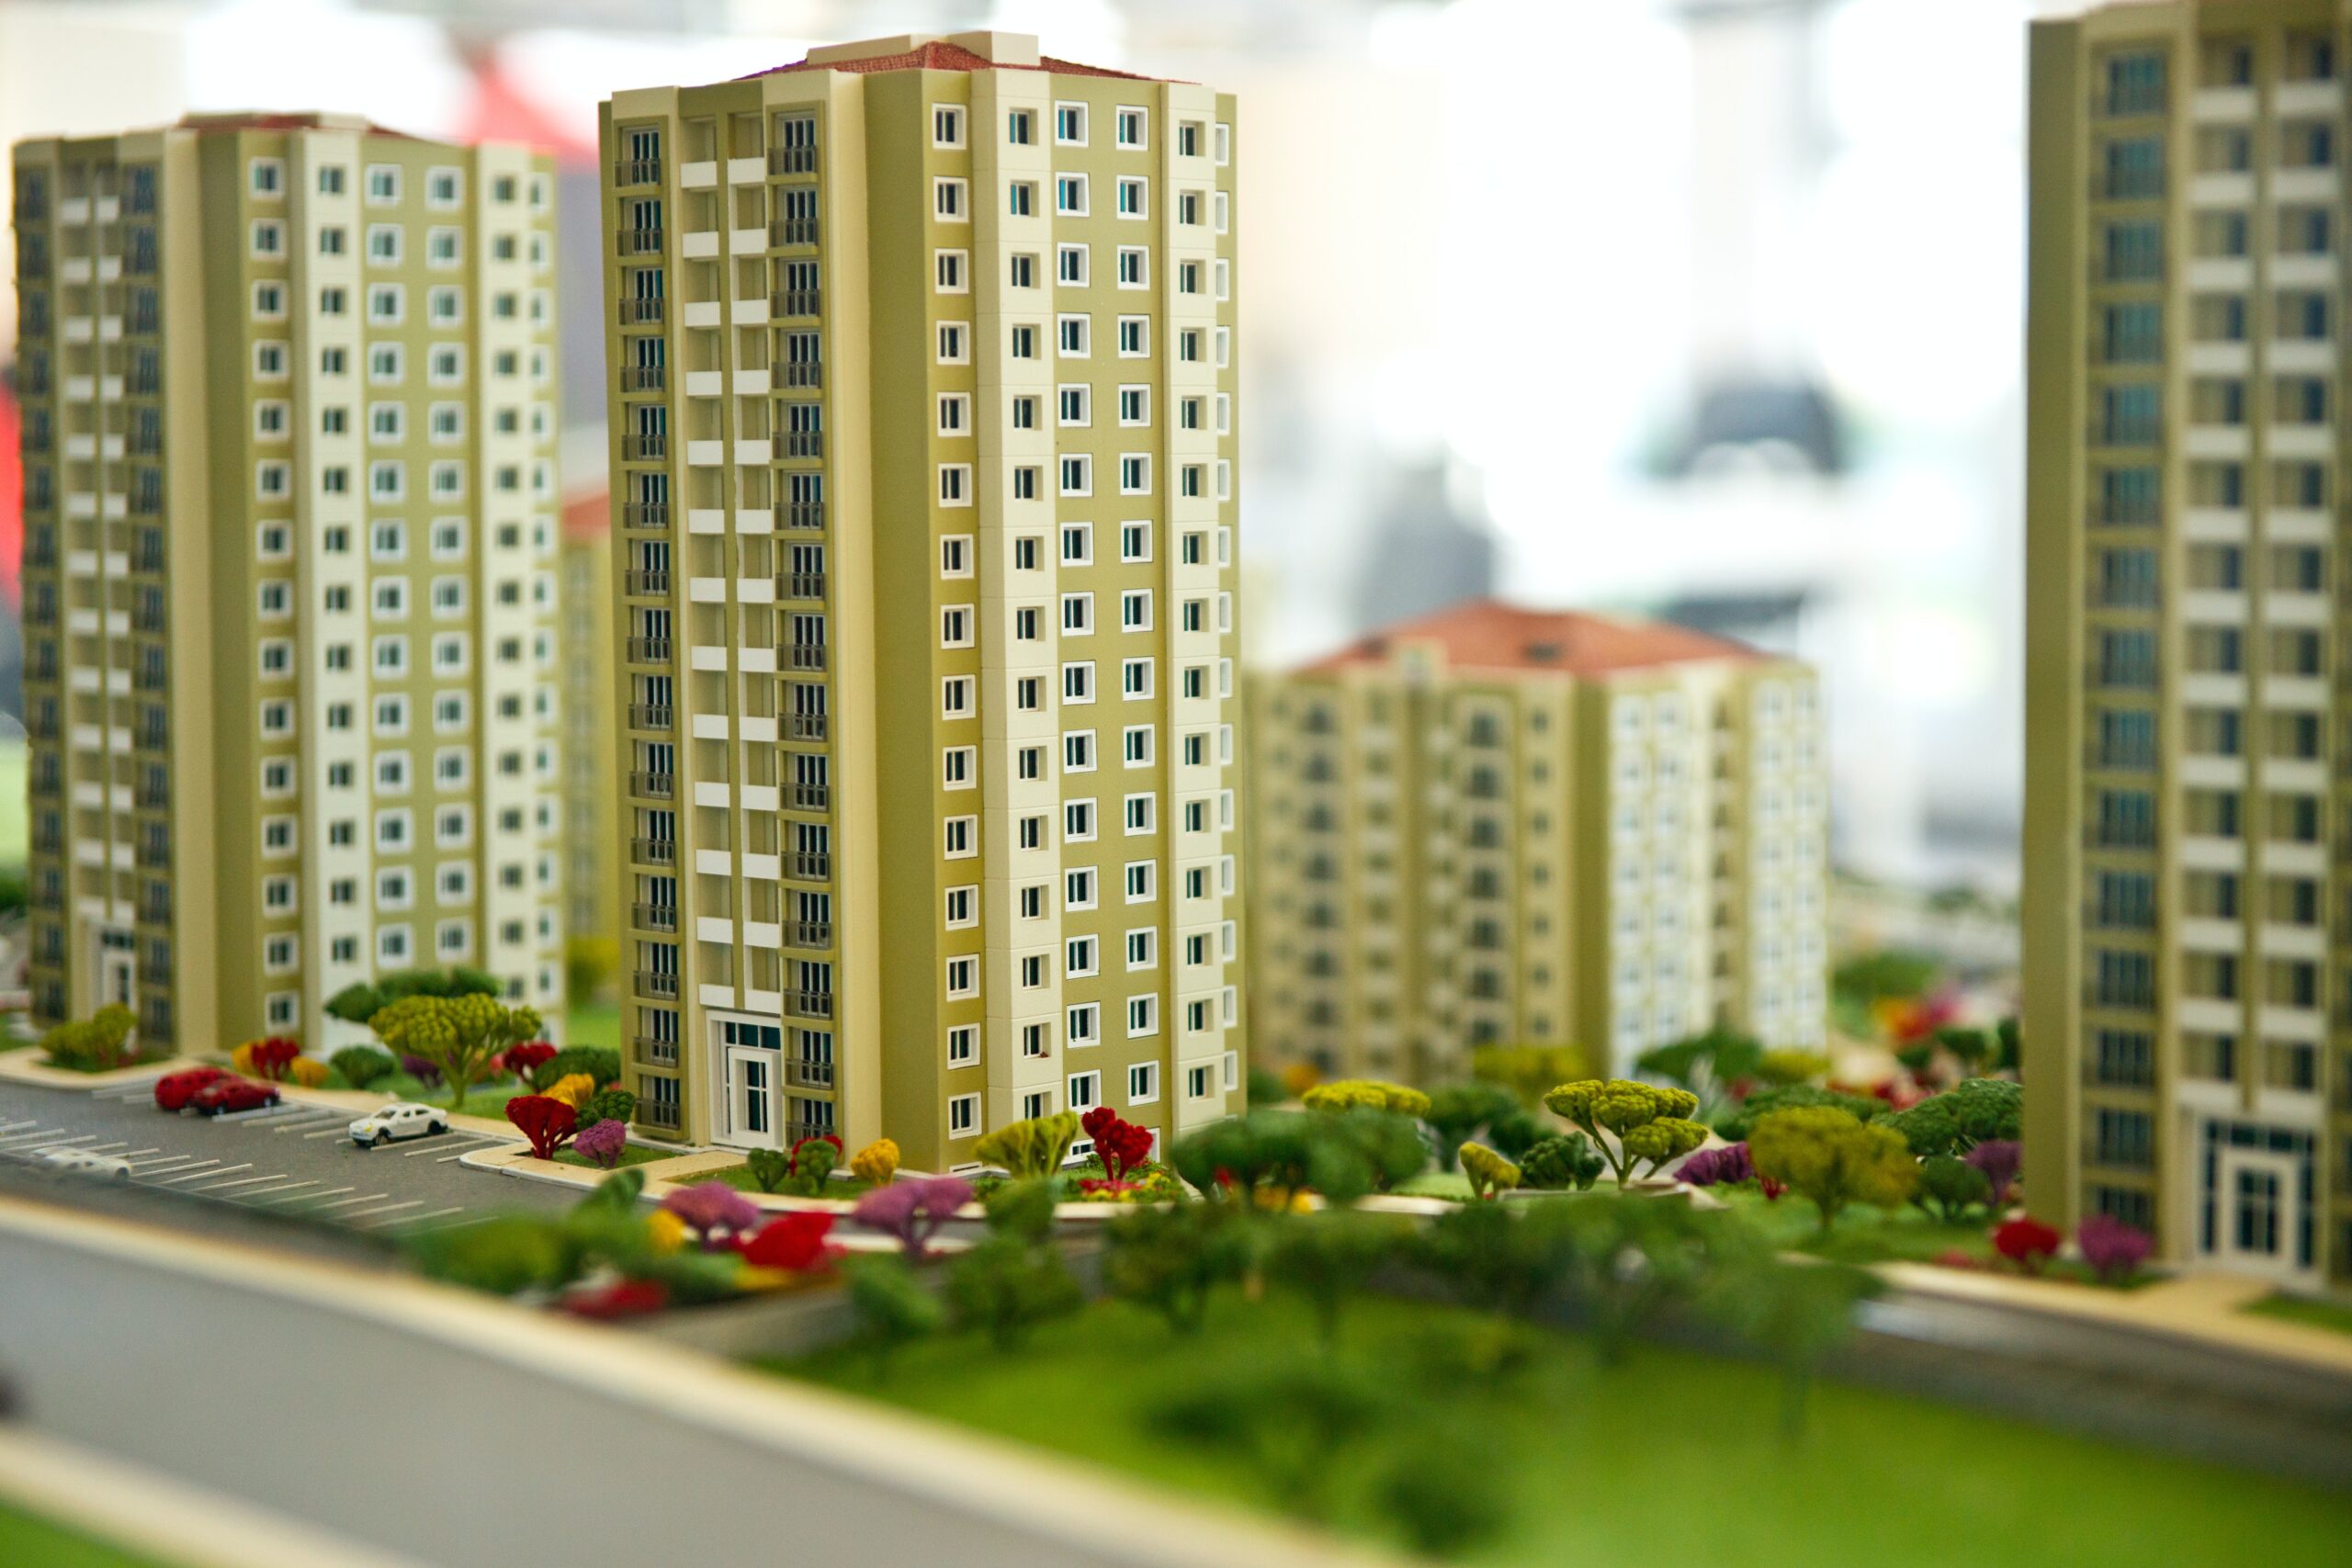 Is a real estate business in Vietnam required to set up a business